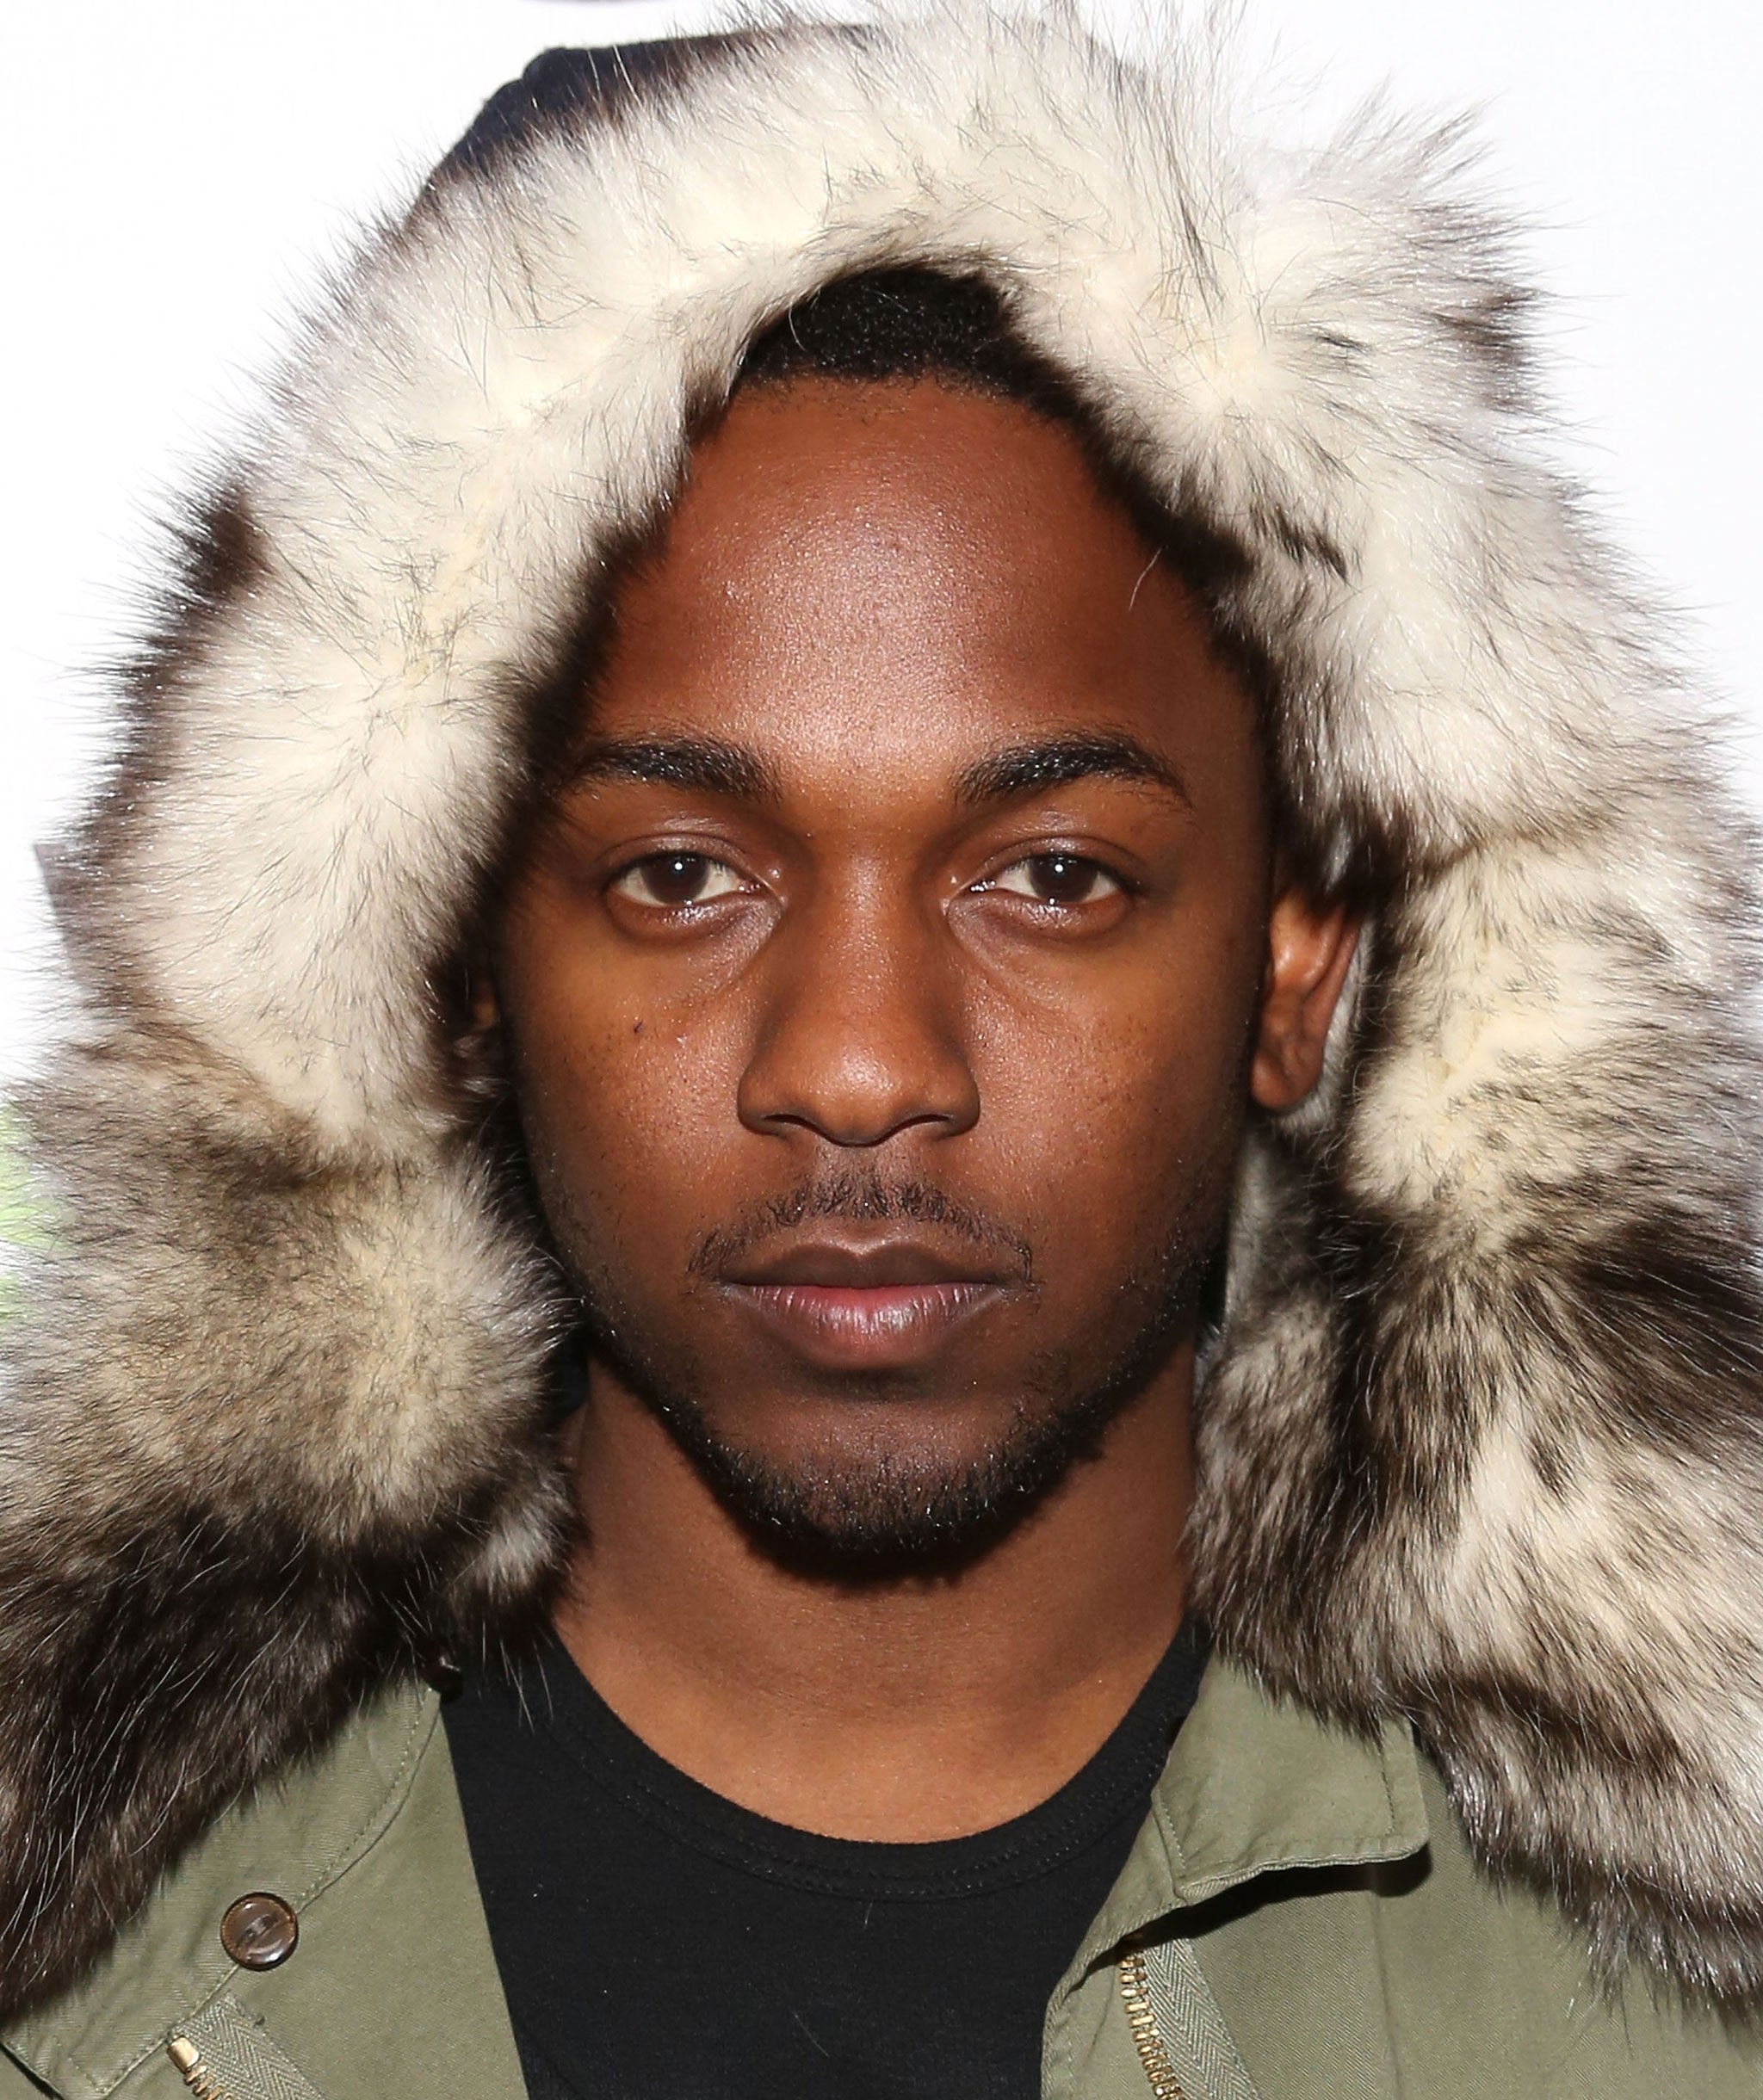 Kendrick has already recorded 30 of 40 songs to choose from